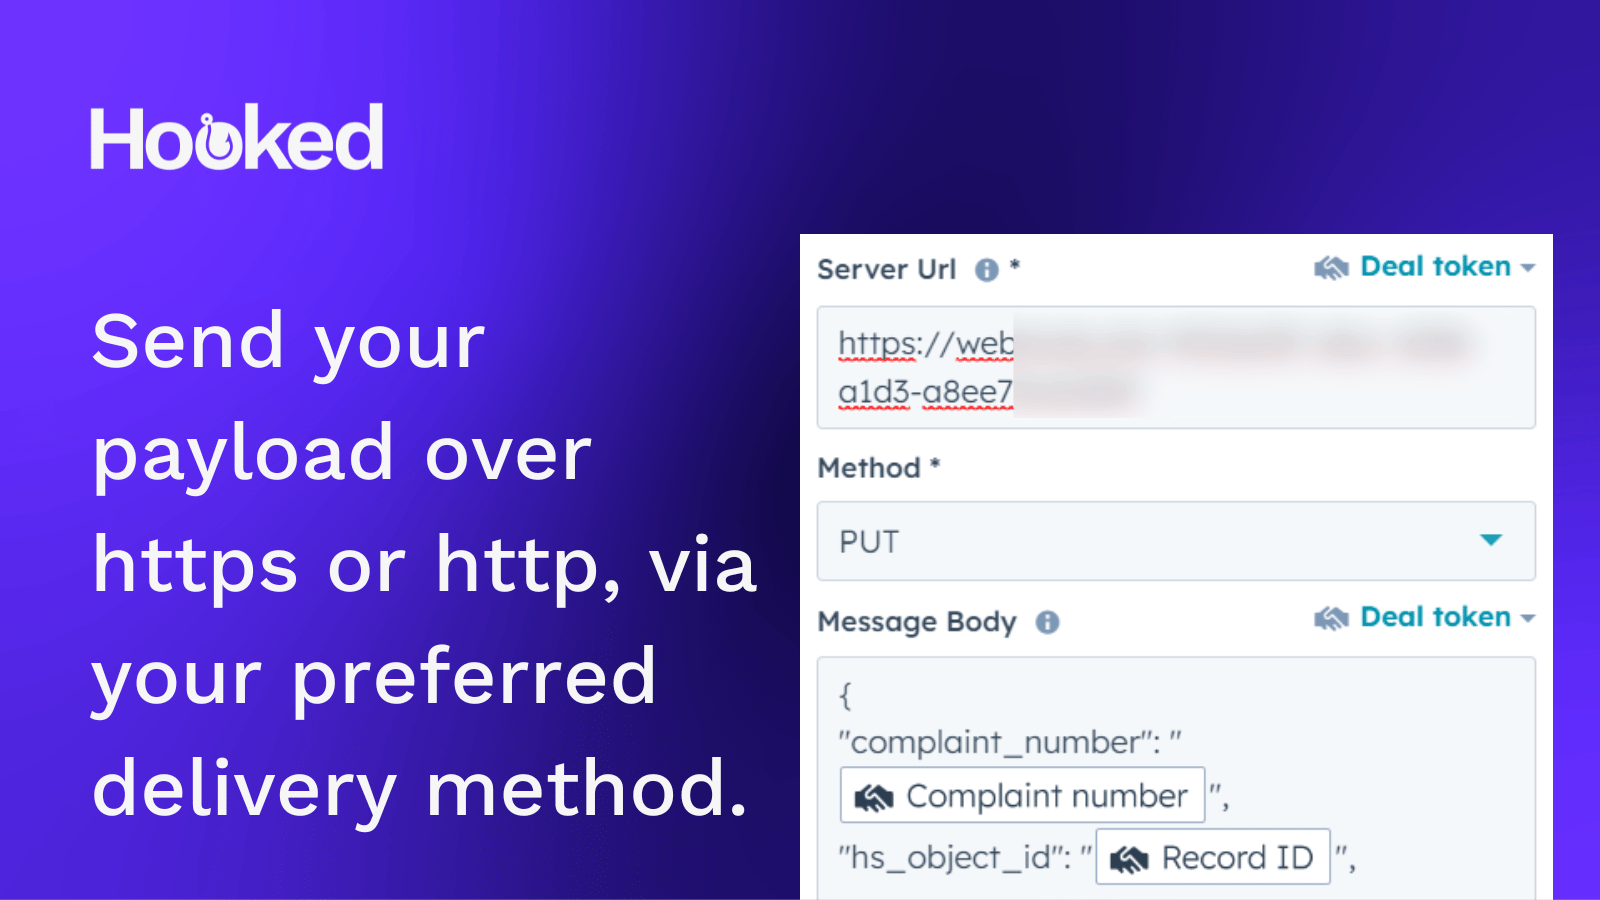 send your payload over https or http, via your preferred delivery method